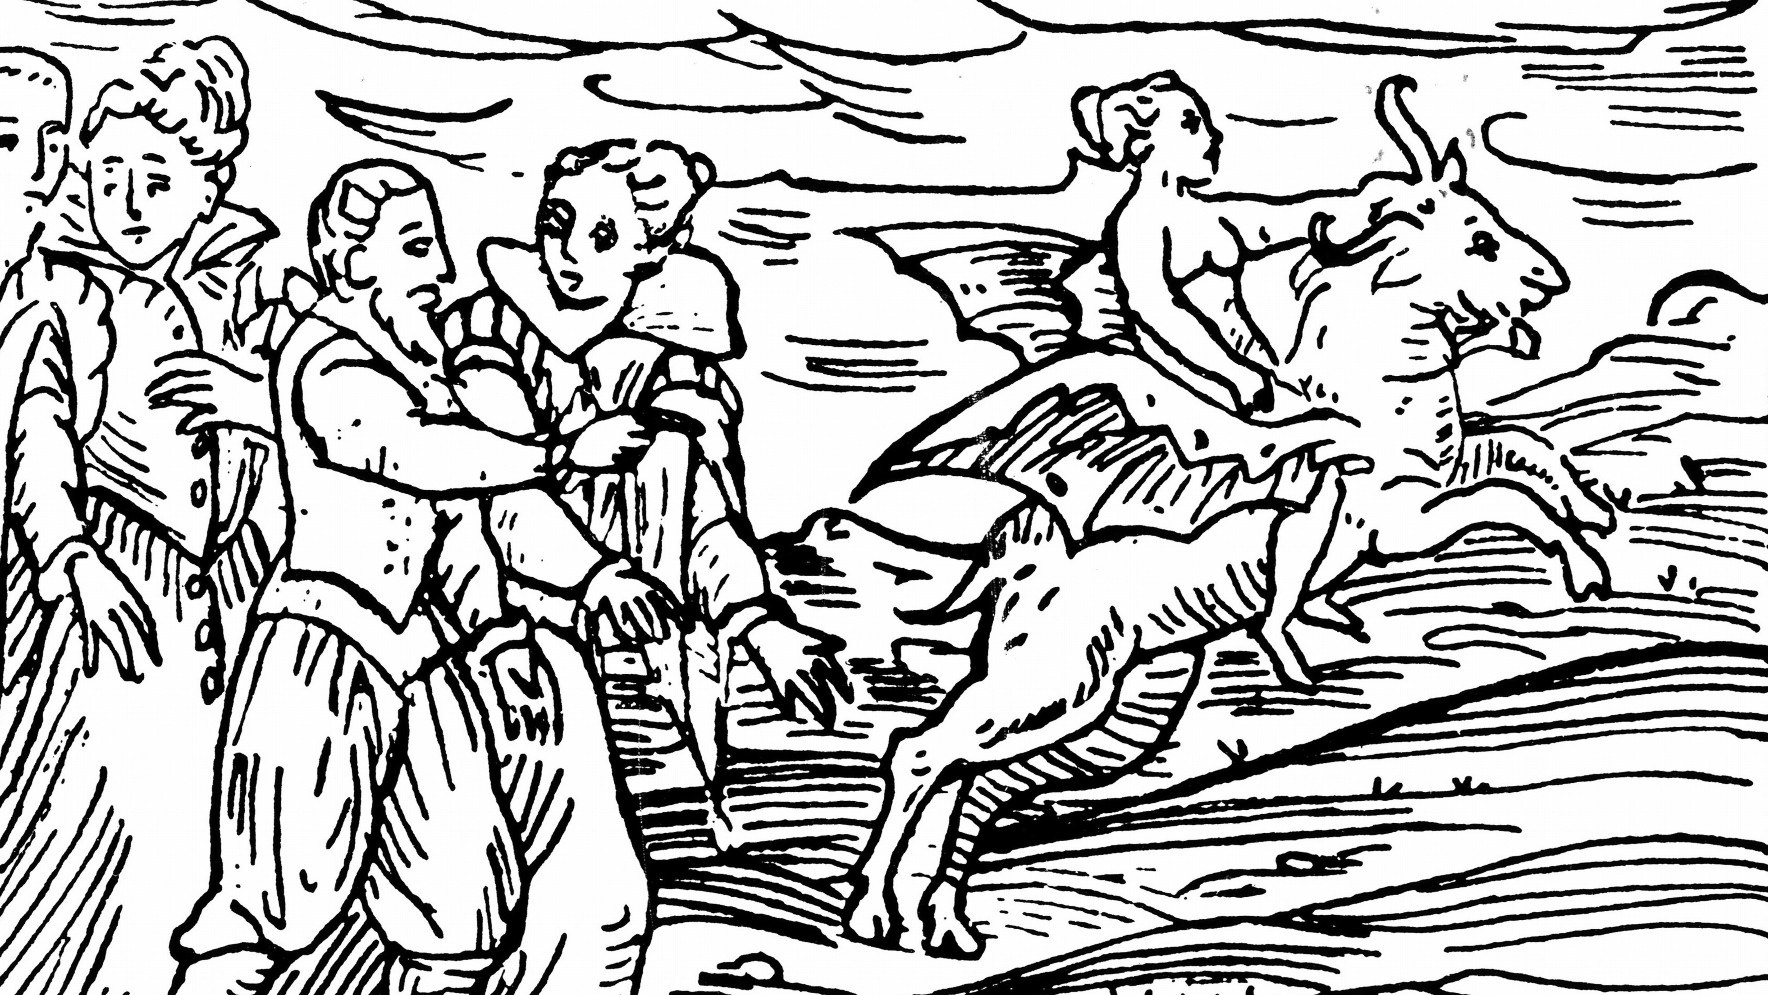 A 1608 woodcut from Francesco Maria Guazzo's Compendium Maleficarum showing Satan as a flying goat, carrying a witch to the Sabbath.